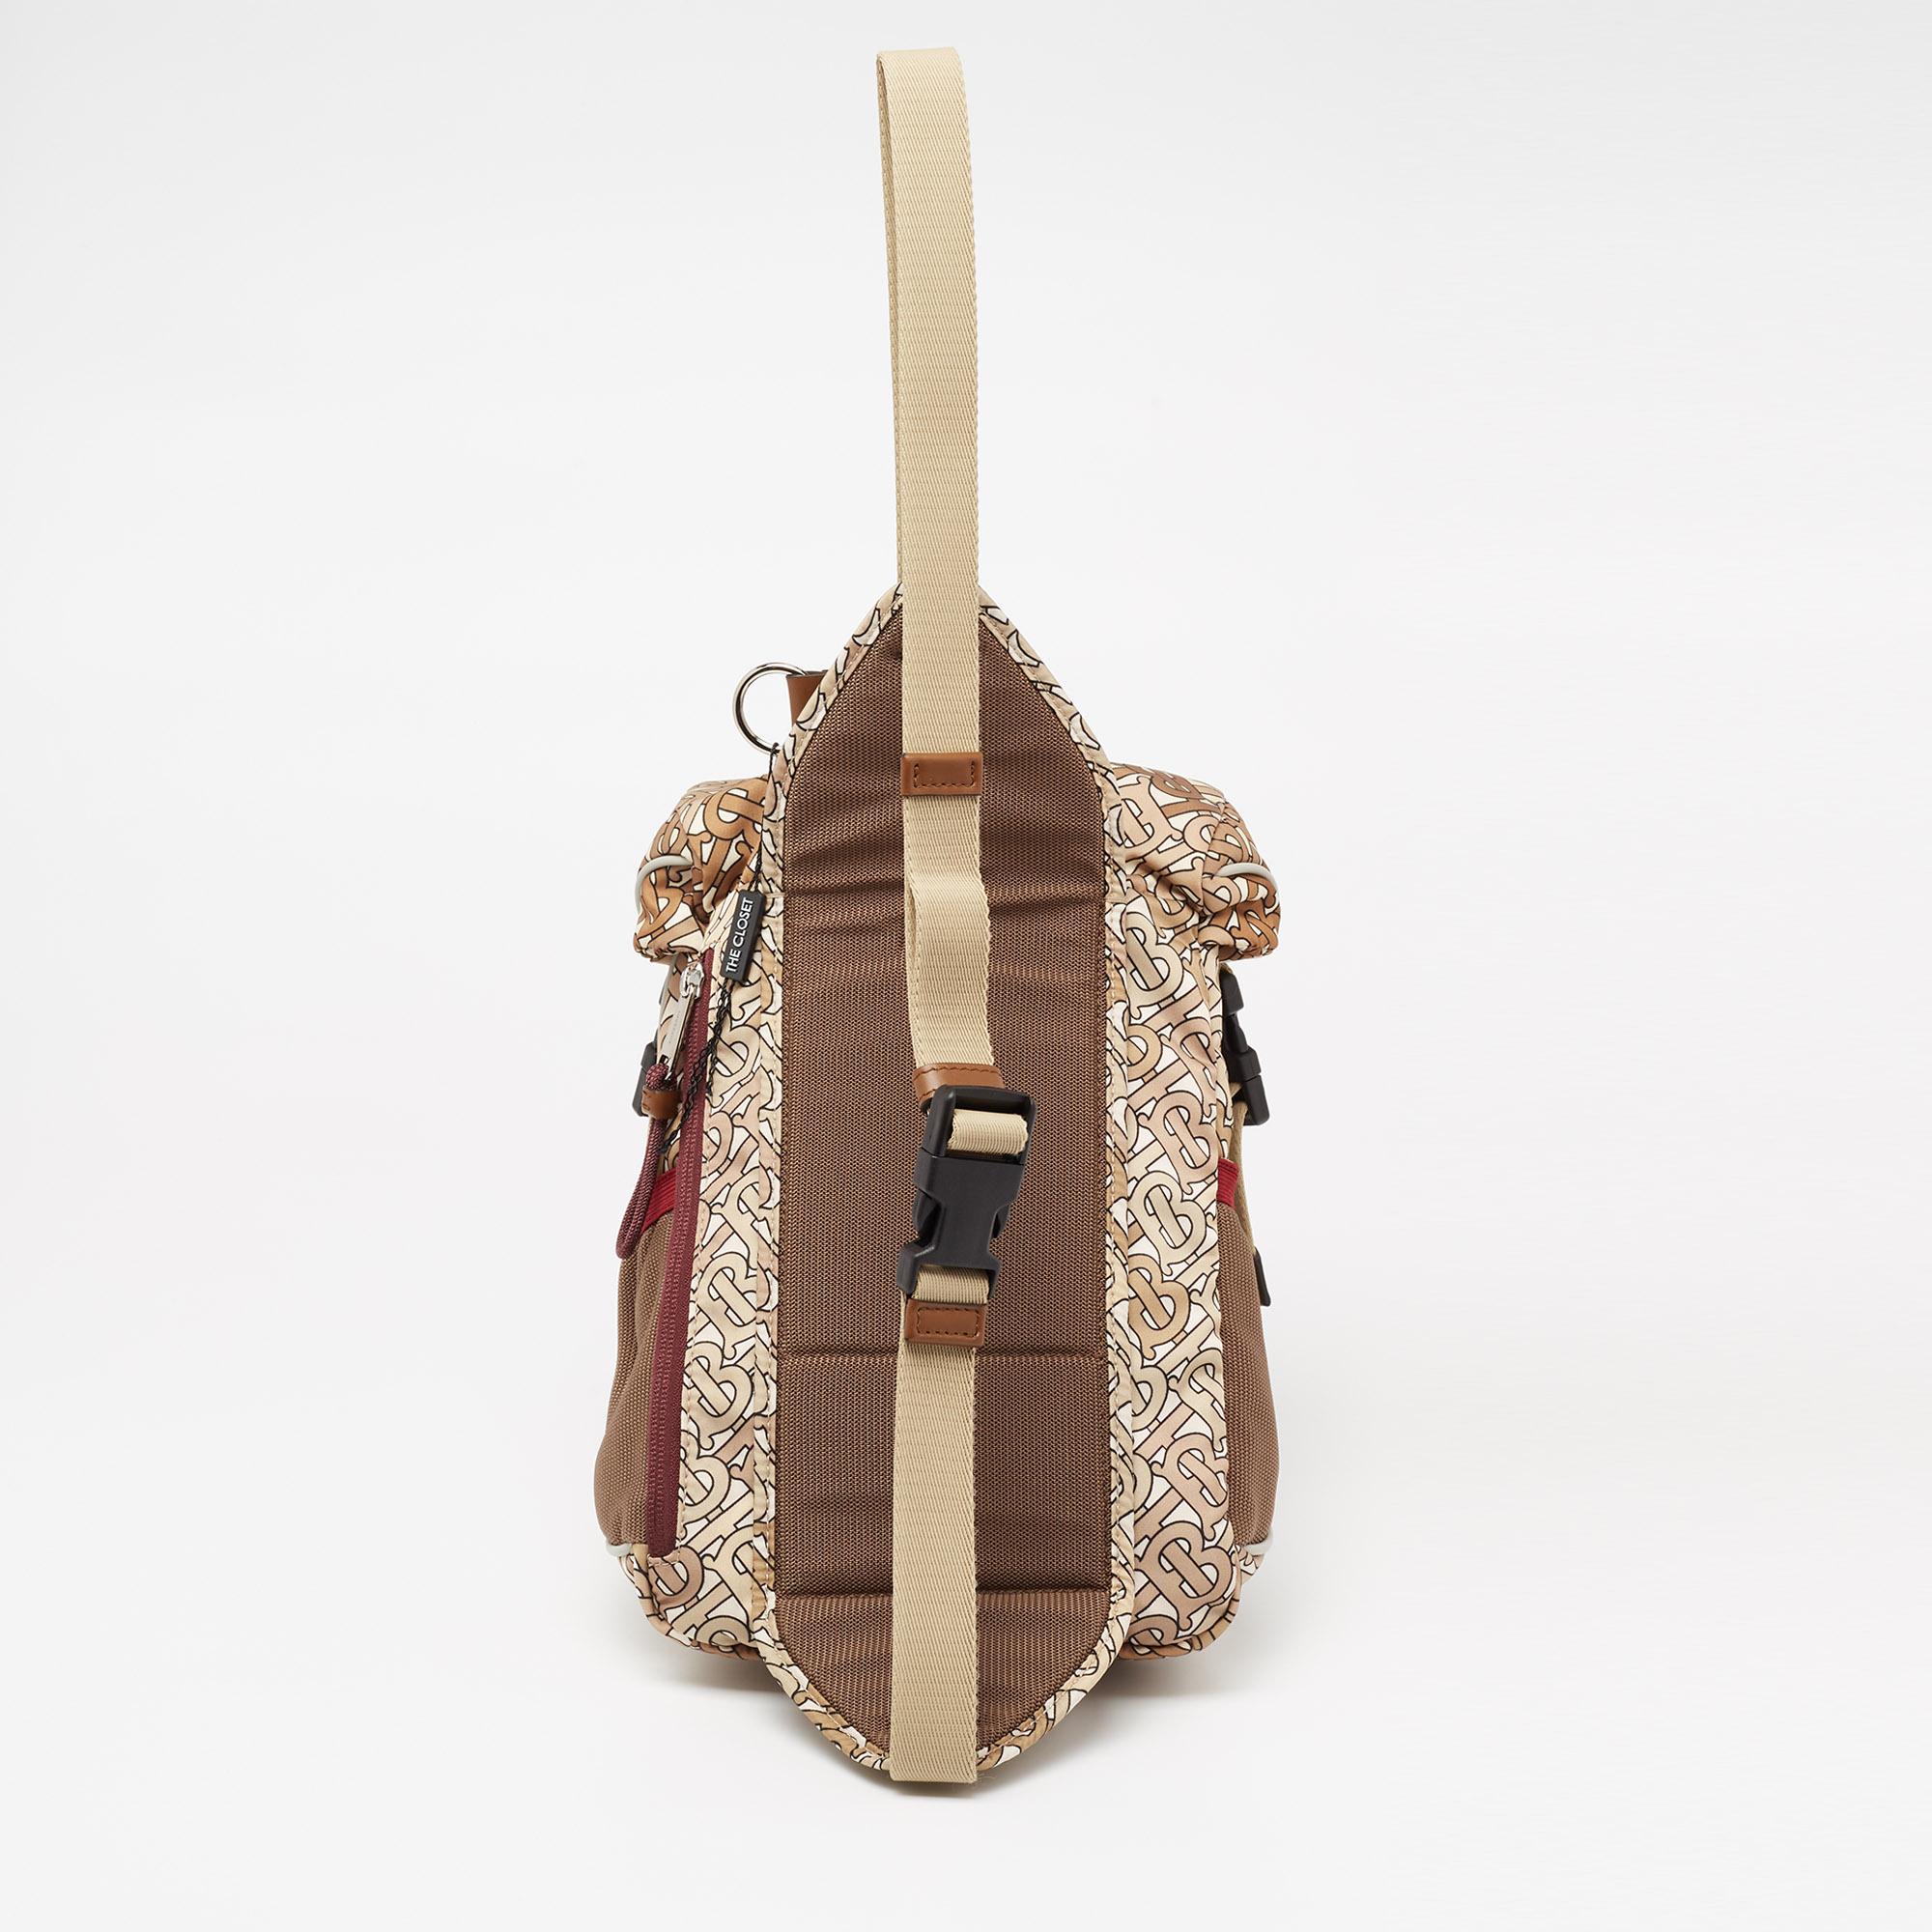 Lend your outfit the signature aesthetics of Burberry with this Leo backpack. Made from nylon, it is adorned with the signature TB monogram and features a front zipper pocket, a single buckle strap, and silver-tone hardware. The interior of this